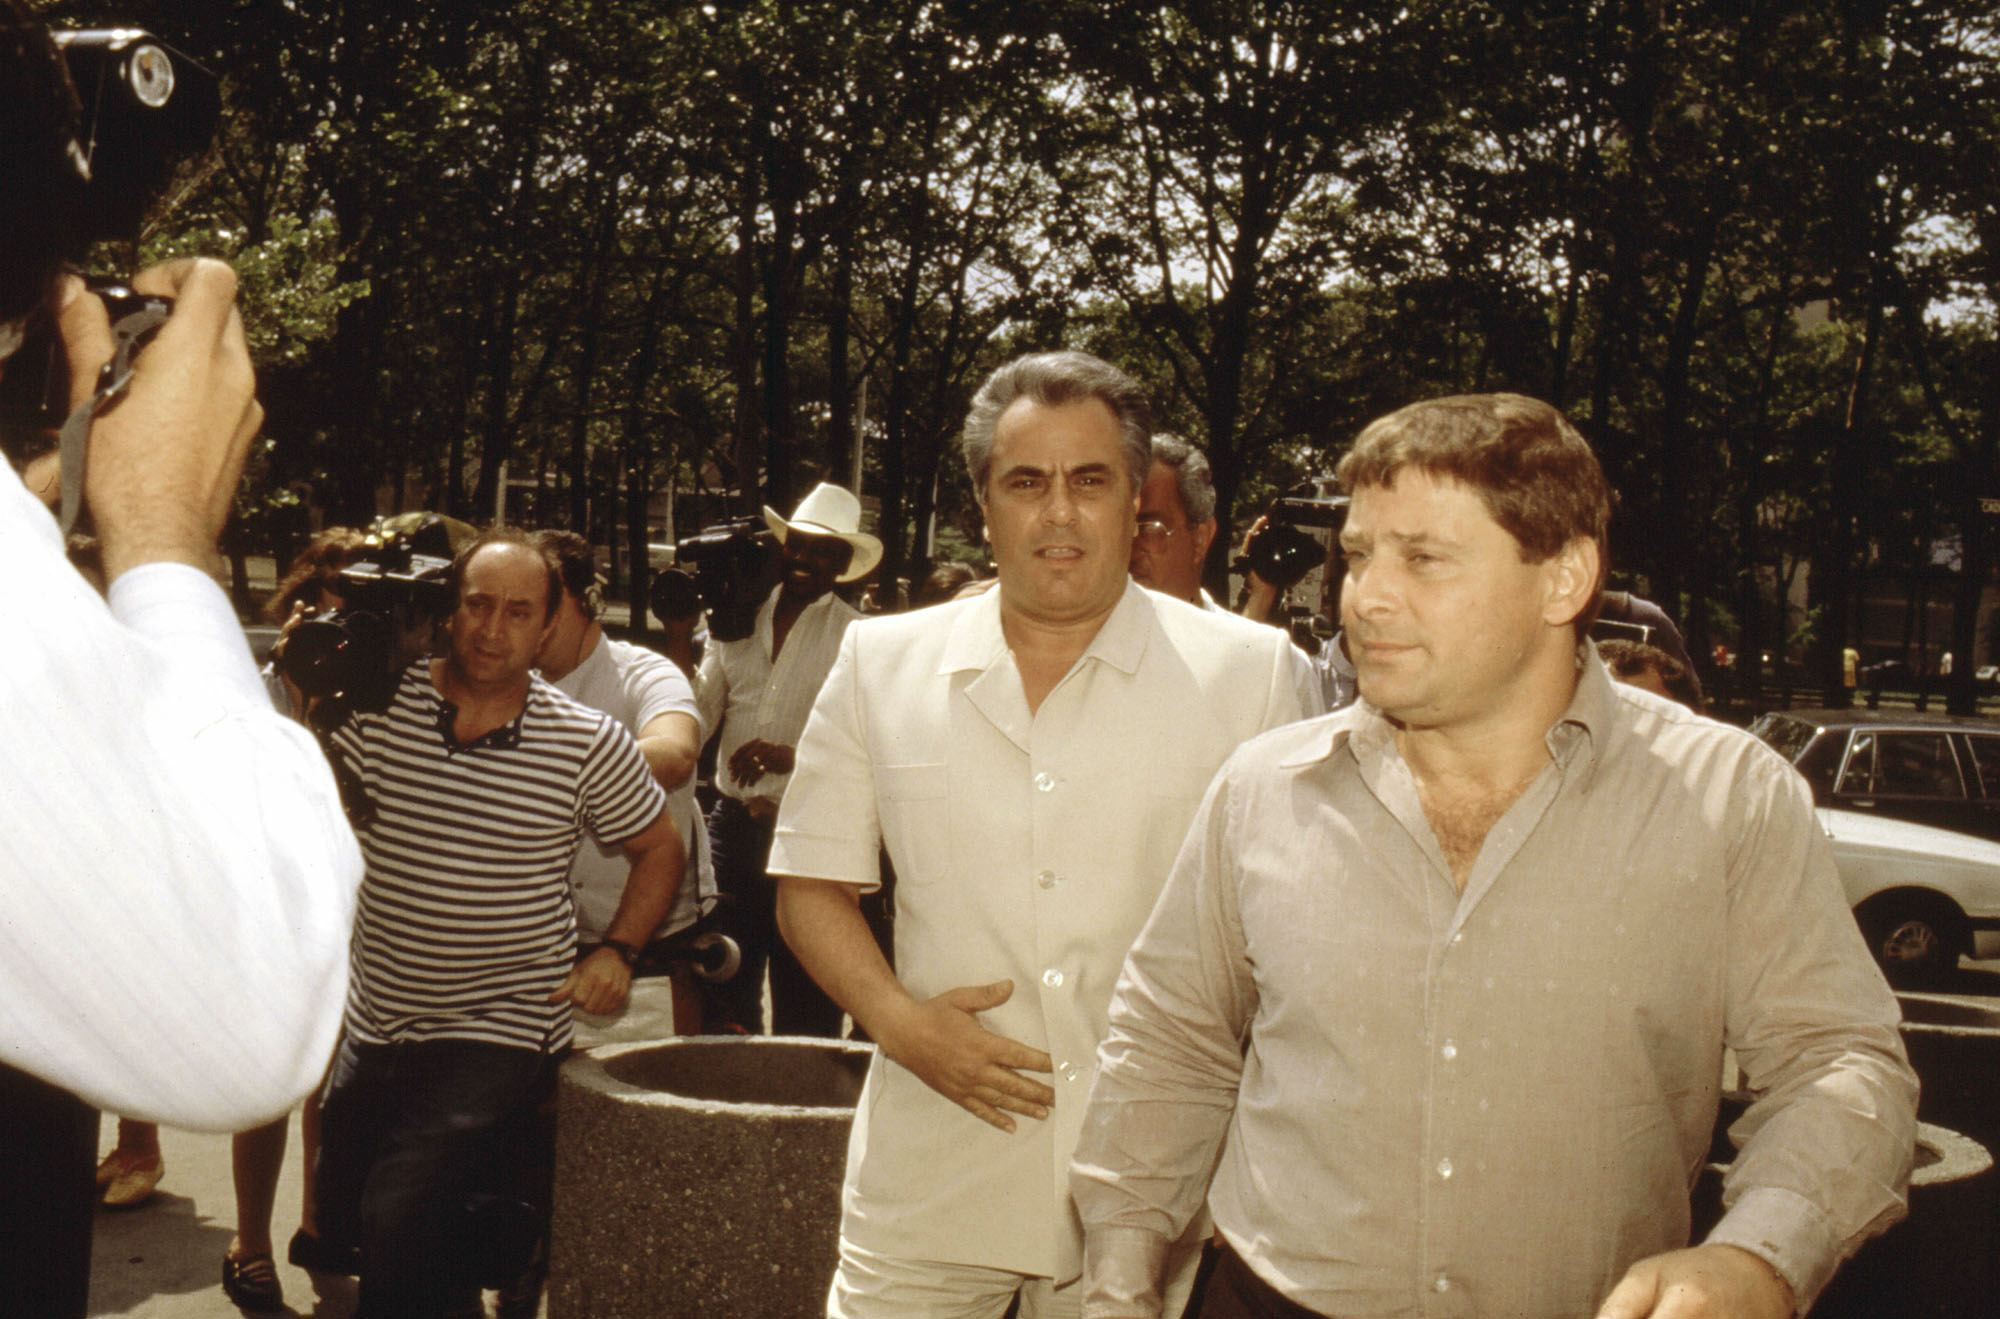 John Gotti enters the Brooklyn Federal courthouse with Sammy "The Bull" Gravano (right) in New York City